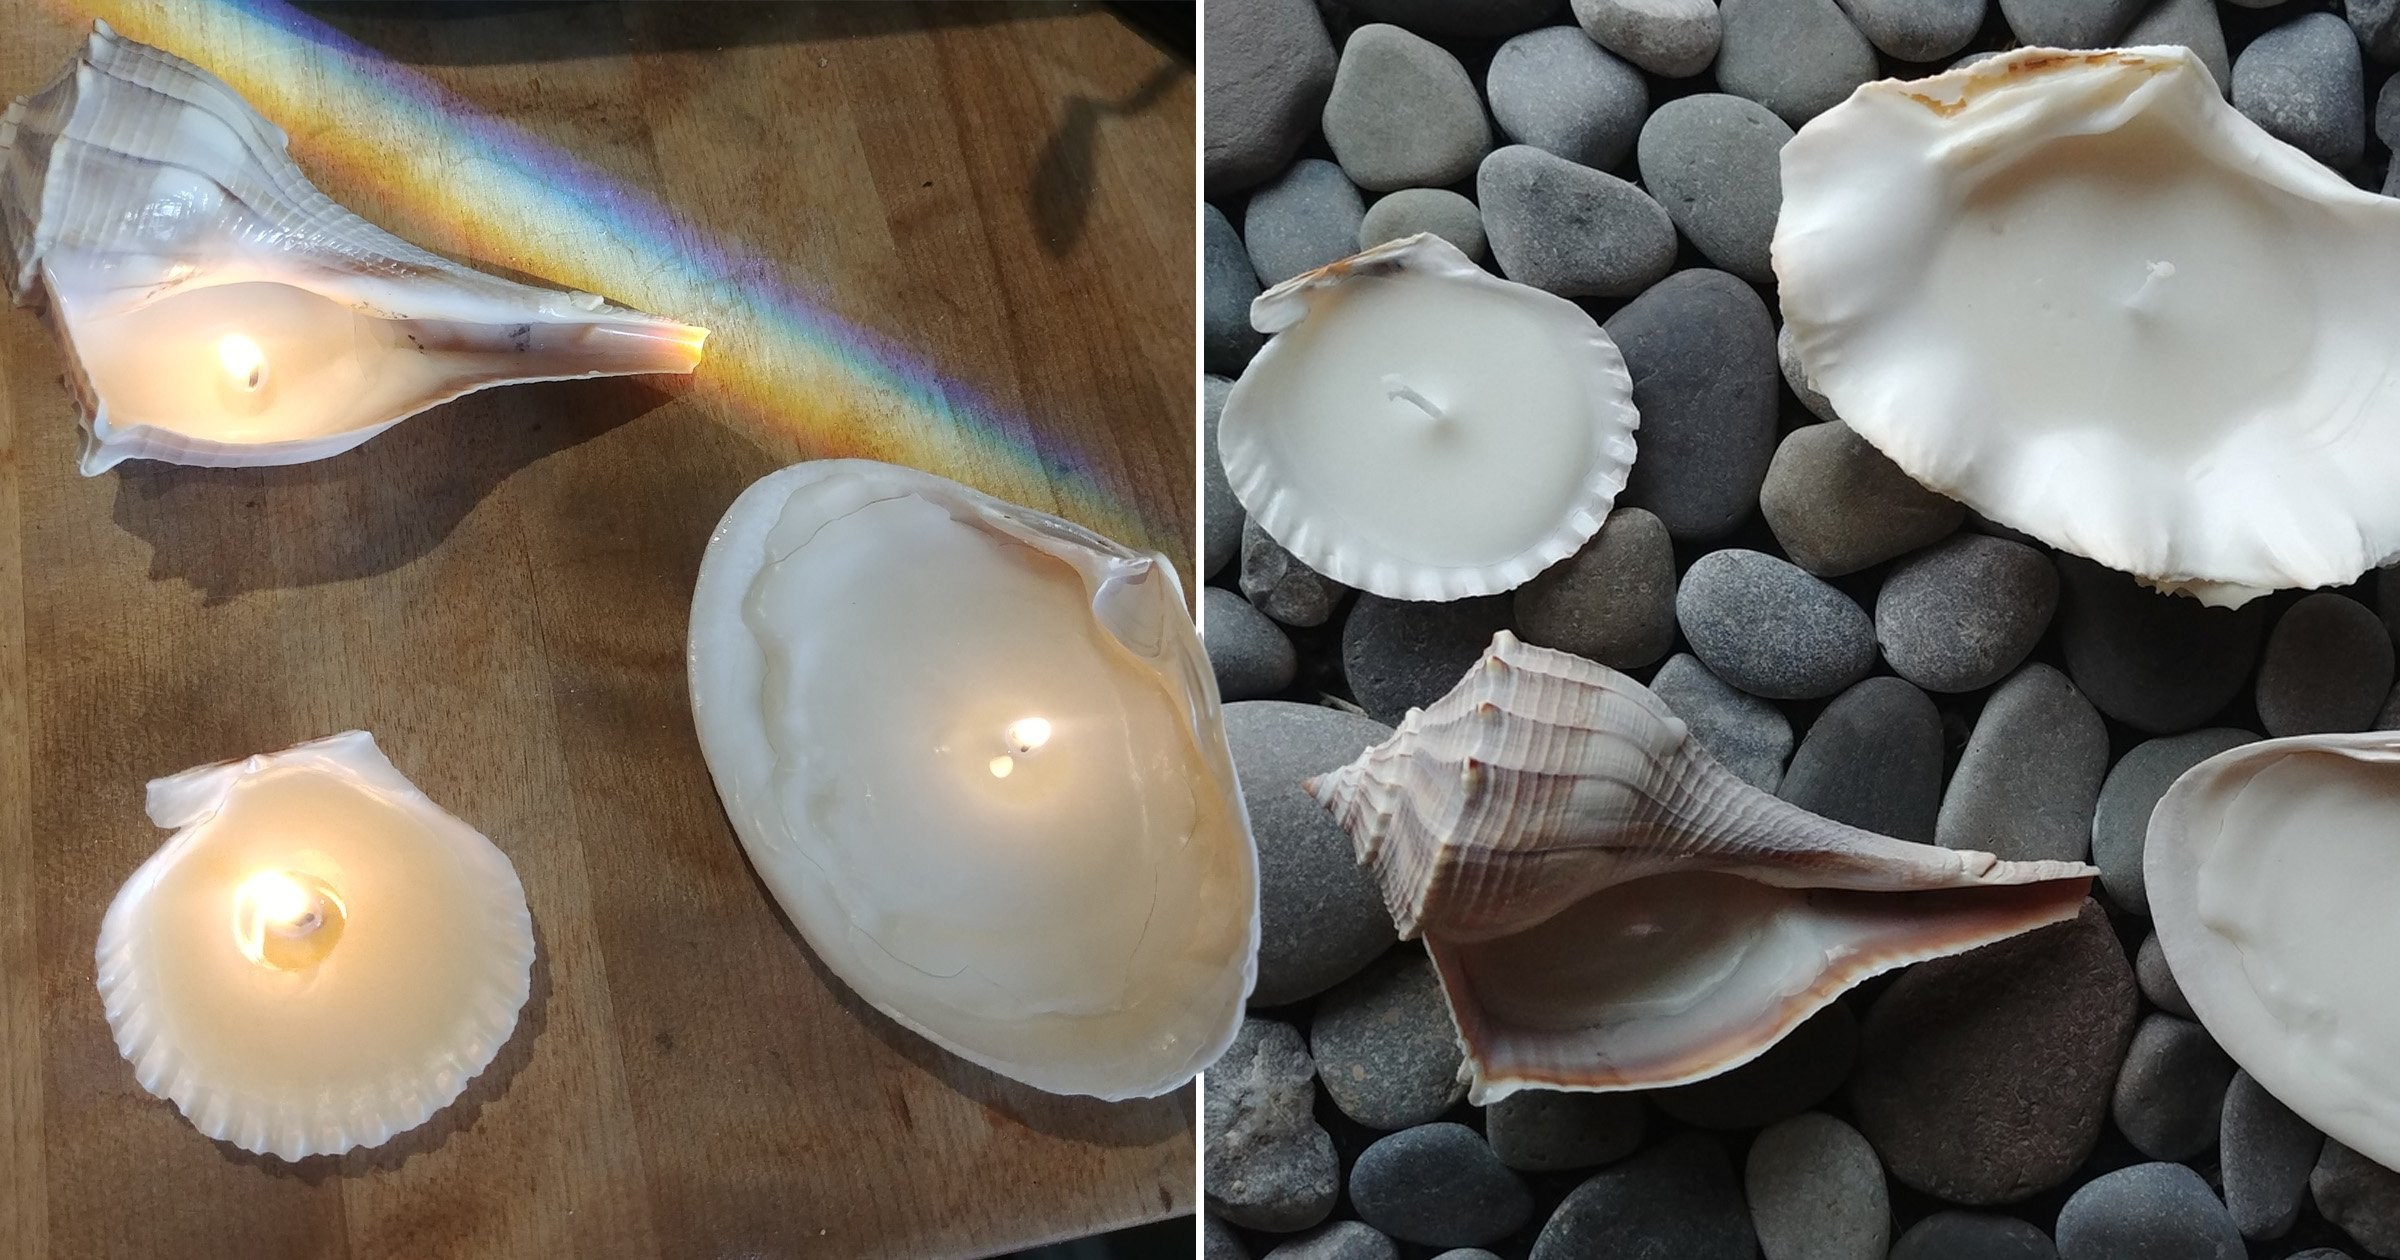 Shell candles are all over Instagram – here’s how to make them